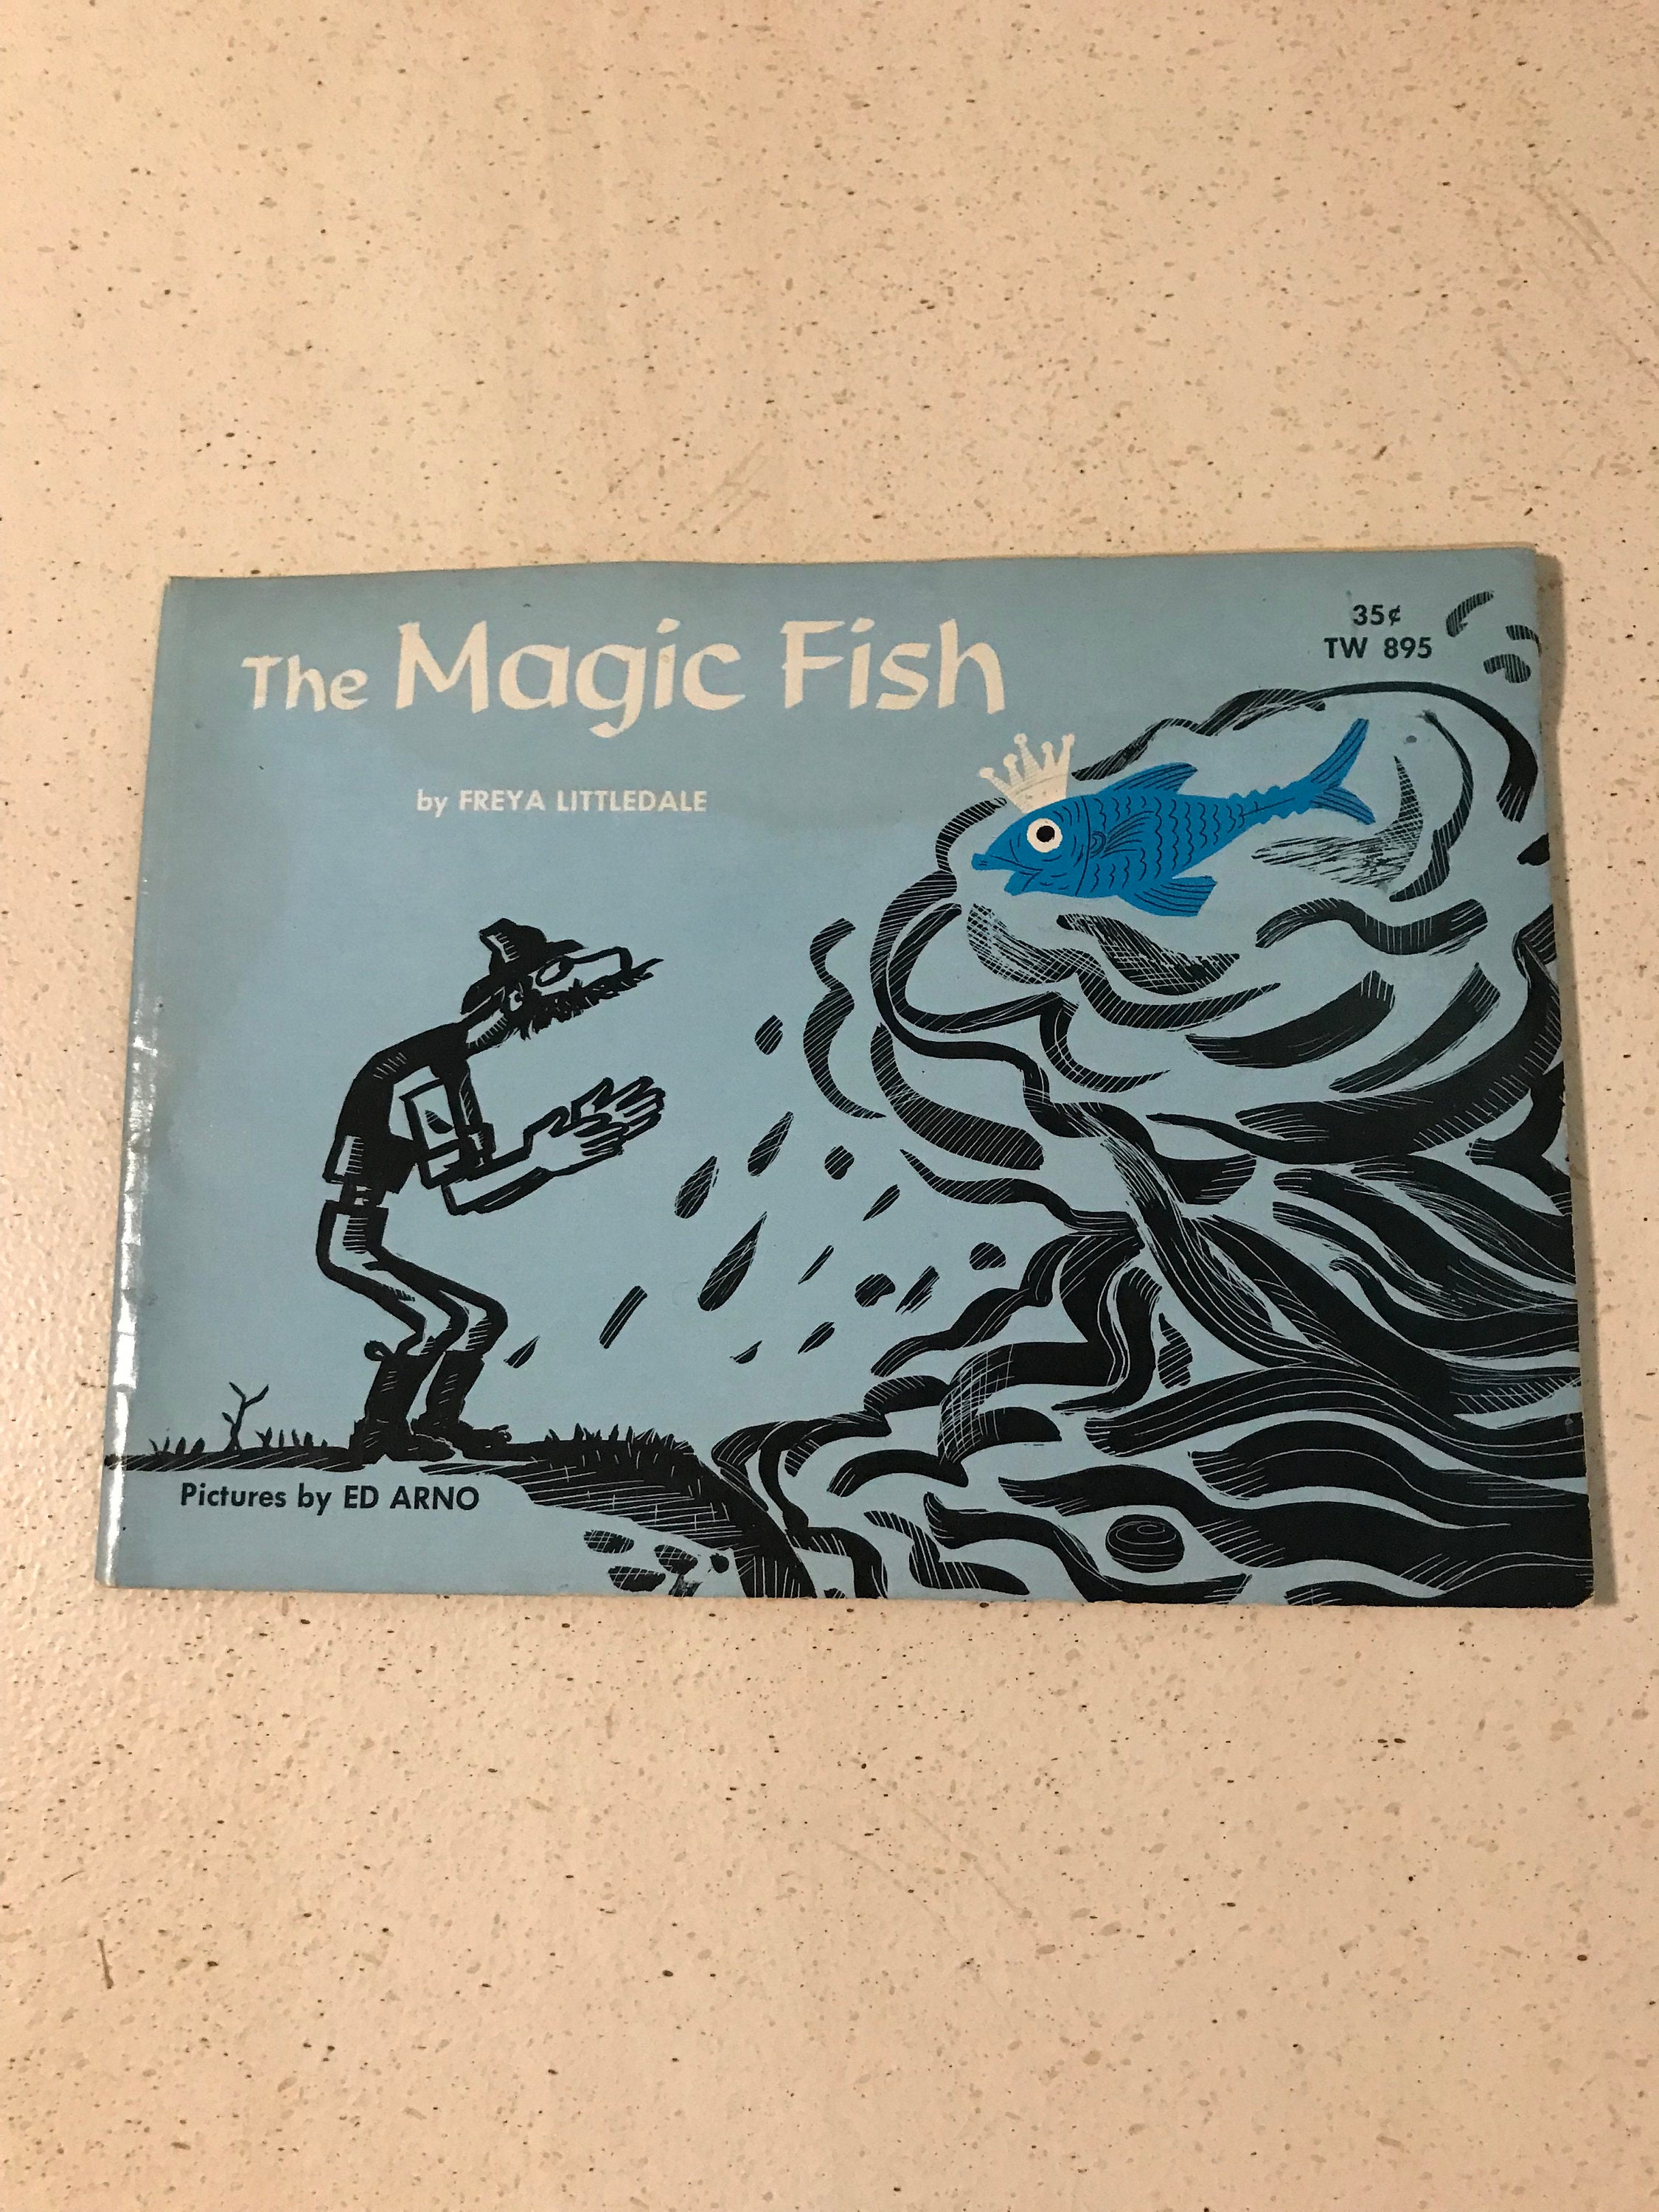 The Magic Fish by Freya Littledale Vintage 1967 Scholastic 1st Printing  Soft Cover Read Aloud Story Book Illustrations by Ed Arno